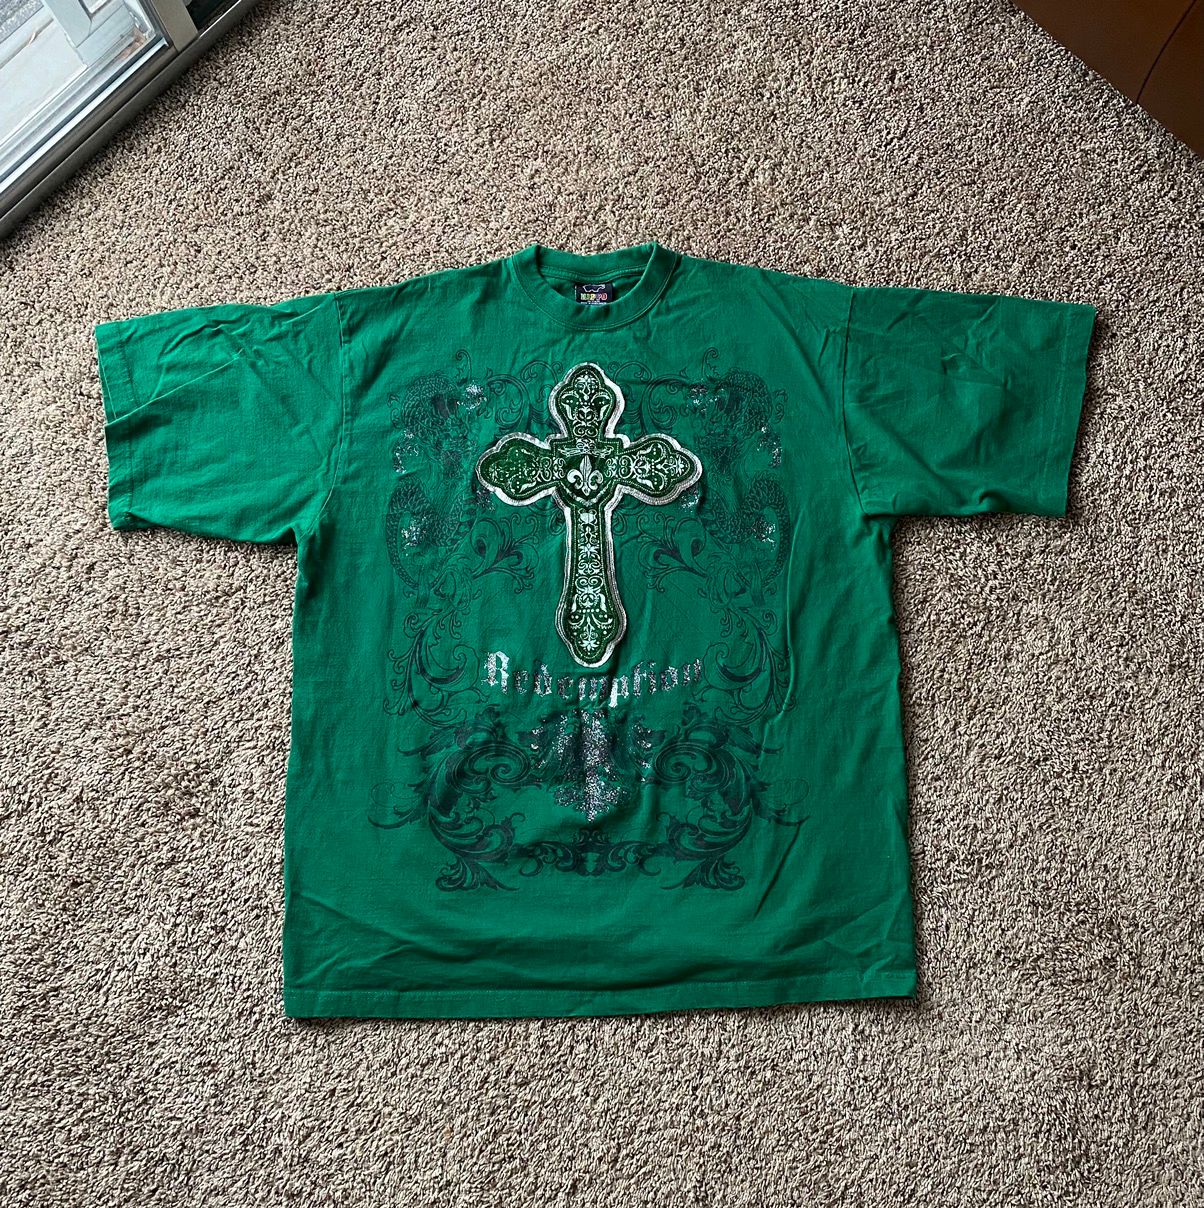 Pre-owned Christian Audigier X Ed Hardy Hippo Vintage T-shirt Skull Cross Dragon Redemption In Green